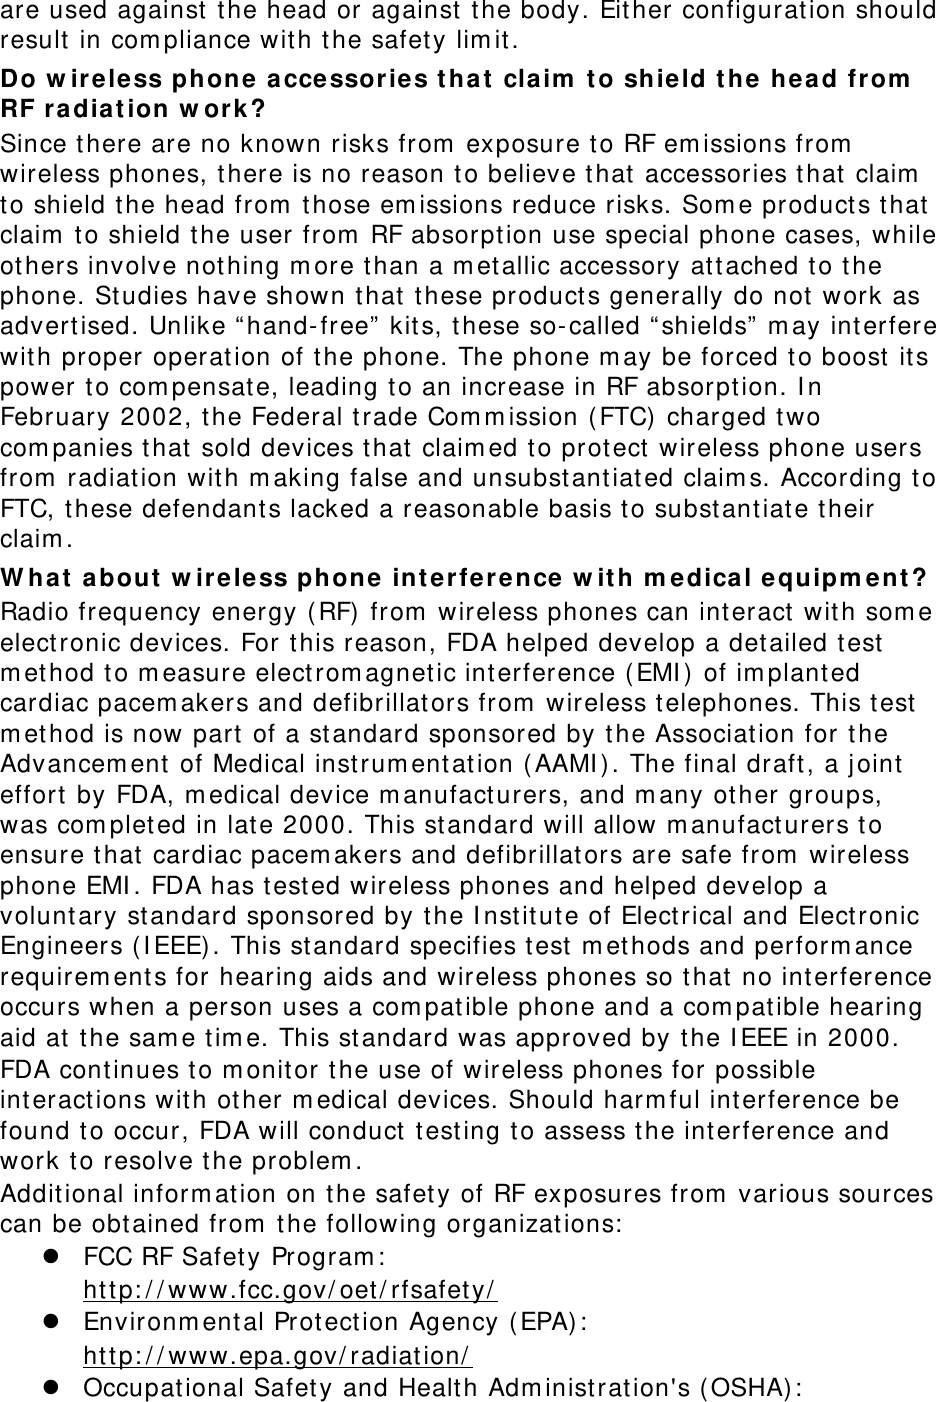 are used against  the head or against  t he body. Eit her configuration should result in com pliance wit h t he safet y lim it. Do w ir e le ss phone  a cce ssor ie s t hat  claim  t o shield t he he a d from  RF ra dia t ion w or k? Since t here are no known risks from  exposure t o RF em issions from  wireless phones, there is no reason t o believe that  accessories that  claim  to shield t he head from  t hose em issions reduce risks. Som e product s that  claim  to shield the user from  RF absorption use special phone cases, while ot hers involve not hing m ore t han a m et allic accessory at tached t o t he phone. St udies have shown t hat  these product s generally do not  work as advertised. Unlike “ hand- free”  kits, these so- called “ shields”  m ay interfere with proper operat ion of t he phone. The phone m ay be forced t o boost  it s power t o com pensat e, leading t o an increase in RF absorpt ion. I n February 2002, t he Federal t rade Com m ission ( FTC) charged t wo com panies that  sold devices t hat  claim ed t o prot ect  wireless phone users from  radiat ion with m aking false and unsubst antiat ed claim s. According to FTC, t hese defendant s lacked a reasonable basis to subst antiat e t heir claim . W hat  a bout  w ireless phone int erference w it h m edica l equipm ent ? Radio frequency energy ( RF)  from  wireless phones can int eract wit h som e elect ronic devices. For t his reason, FDA helped develop a det ailed t est  m ethod t o m easure elect rom agnet ic int erference ( EMI )  of im planted cardiac pacem akers and defibrillat ors from  wireless t elephones. This t est  m ethod is now part  of a st andard sponsored by t he Association for t he Advancem ent  of Medical inst rum entat ion (AAMI ) . The final draft , a j oint effort by FDA, m edical device m anufact urers, and m any other groups, was com plet ed in lat e 2000. This st andard will allow m anufact urers t o ensure t hat cardiac pacem akers and defibrillat ors are safe from  wireless phone EMI . FDA has t est ed wireless phones and helped develop a volunt ary standard sponsored by t he I nst it ute of Elect rical and Elect ronic Engineers (I EEE) . This st andard specifies t est  m et hods and perform ance requirem ent s for hearing aids and wireless phones so that  no interference occurs when a person uses a com pat ible phone and a com patible hearing aid at  the sam e tim e. This st andard was approved by the I EEE in 2000. FDA cont inues to m onit or the use of wireless phones for possible int eractions wit h ot her m edical devices. Should harm ful interference be found to occur, FDA will conduct  test ing t o assess t he interference and work to resolve t he problem . Additional inform at ion on the safety of RF exposures from  various sources can be obtained from  the following organizat ions:   FCC RF Safet y Program :   ht tp: / / www.fcc.gov/ oet / rfsafet y/   Environm ent al Prot ect ion Agency ( EPA) :   ht tp: / / www.epa.gov/ radiat ion/   Occupat ional Safet y and Health Adm inist rat ion&apos;s (OSHA) :    